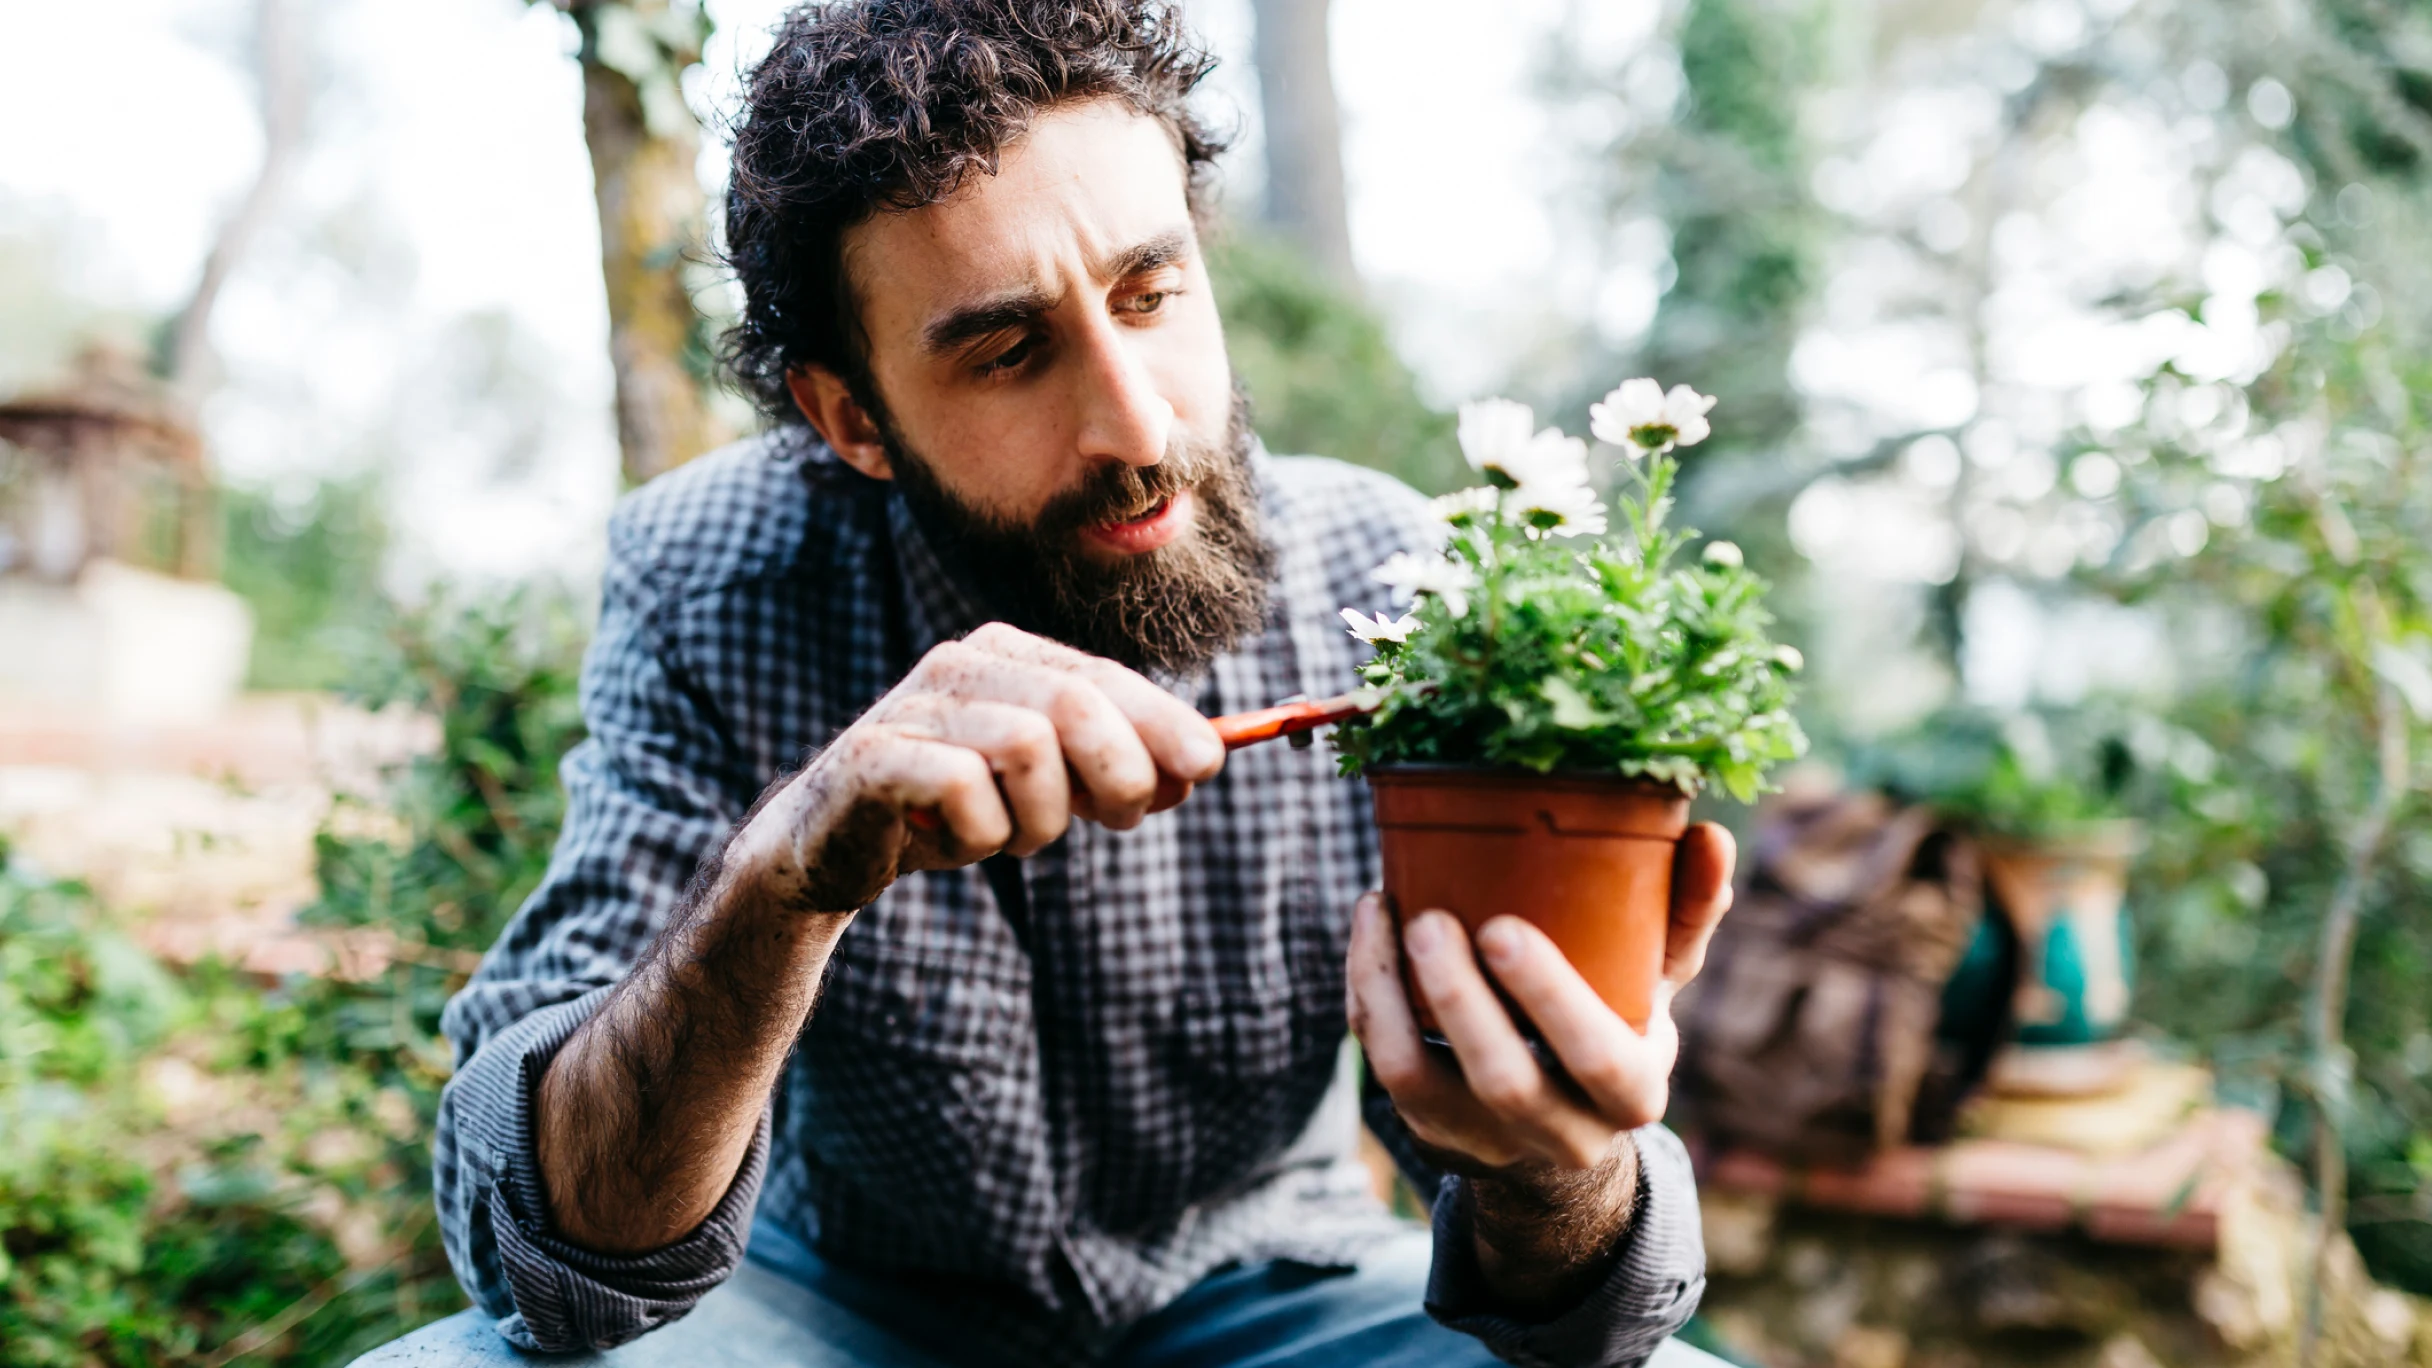 A bearded white man is pruning a potted plant in an outdoor garden.